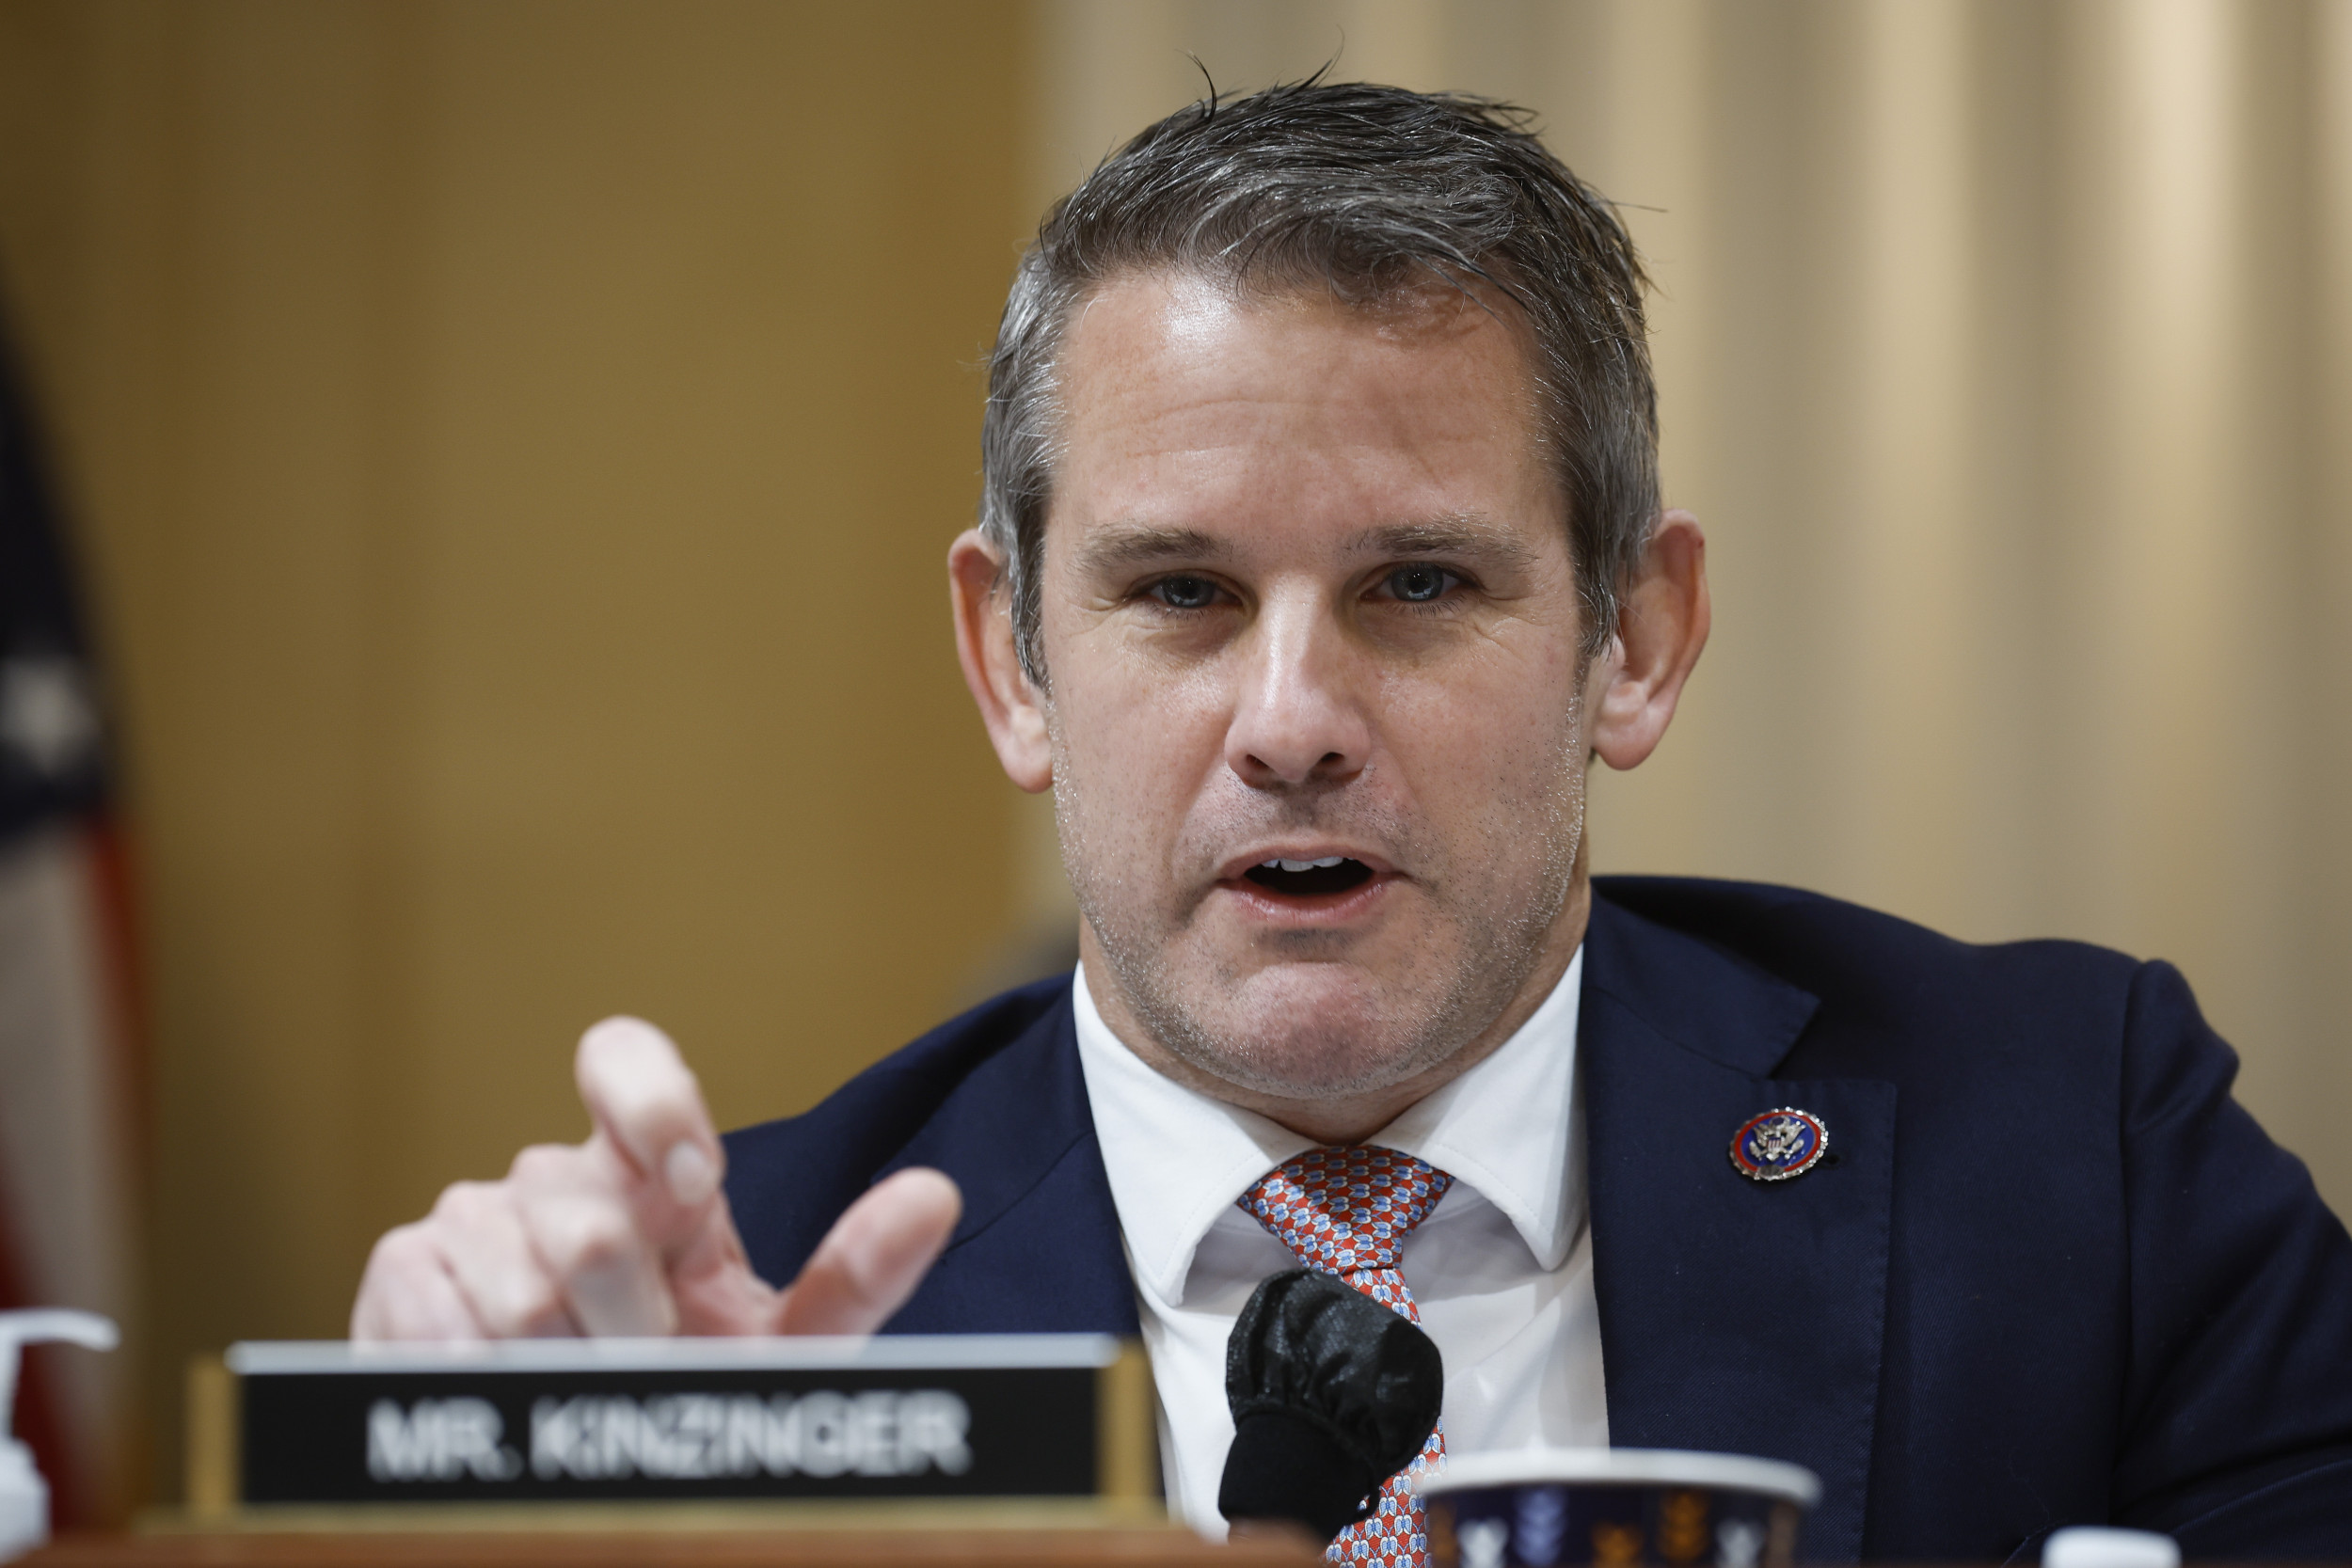 Adam Kinzinger declares the end of the Republican Party